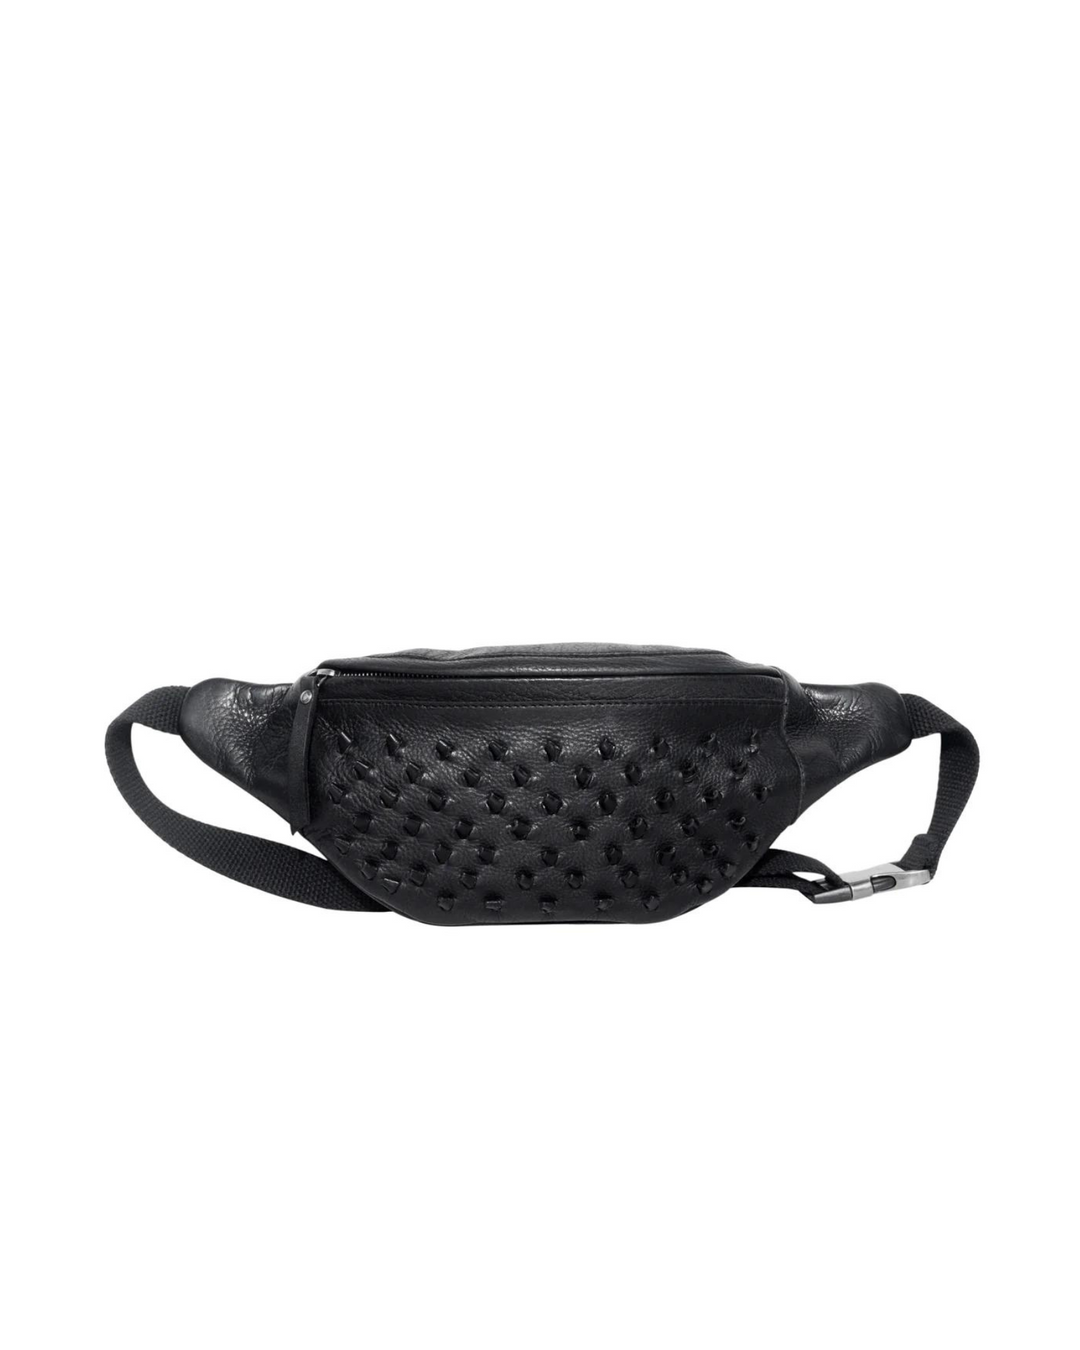 Latico Hayes Fanny Pack in Black - Dear Lucy